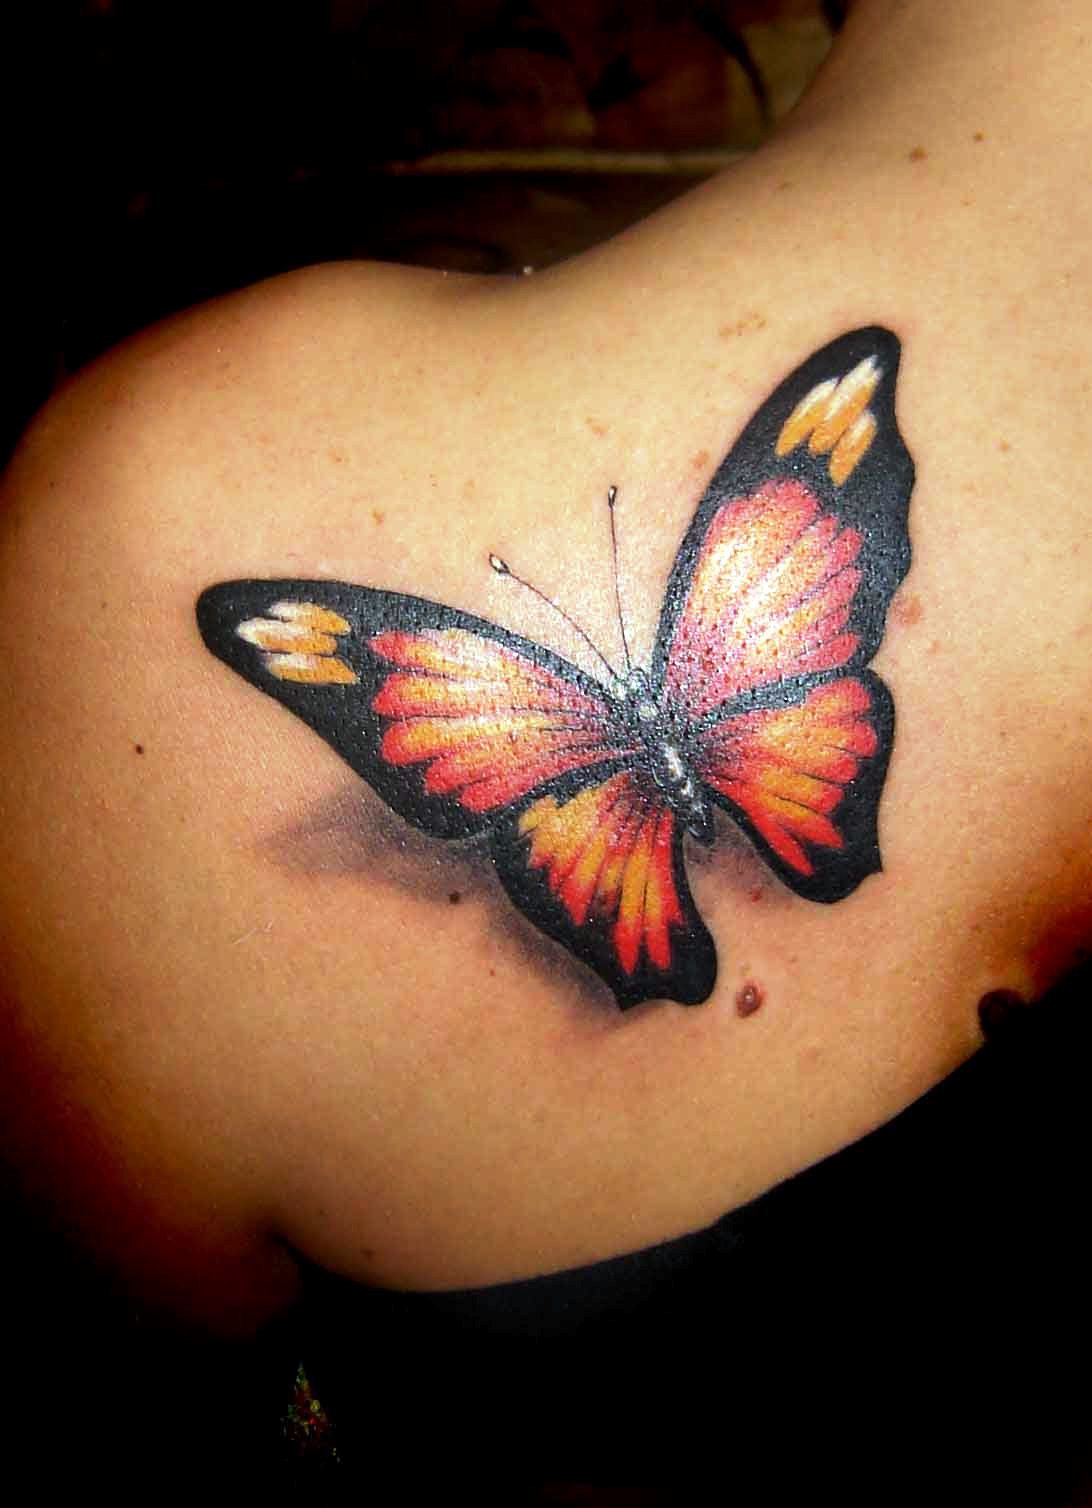 Tattoo-Designs-for-Women-in-2016